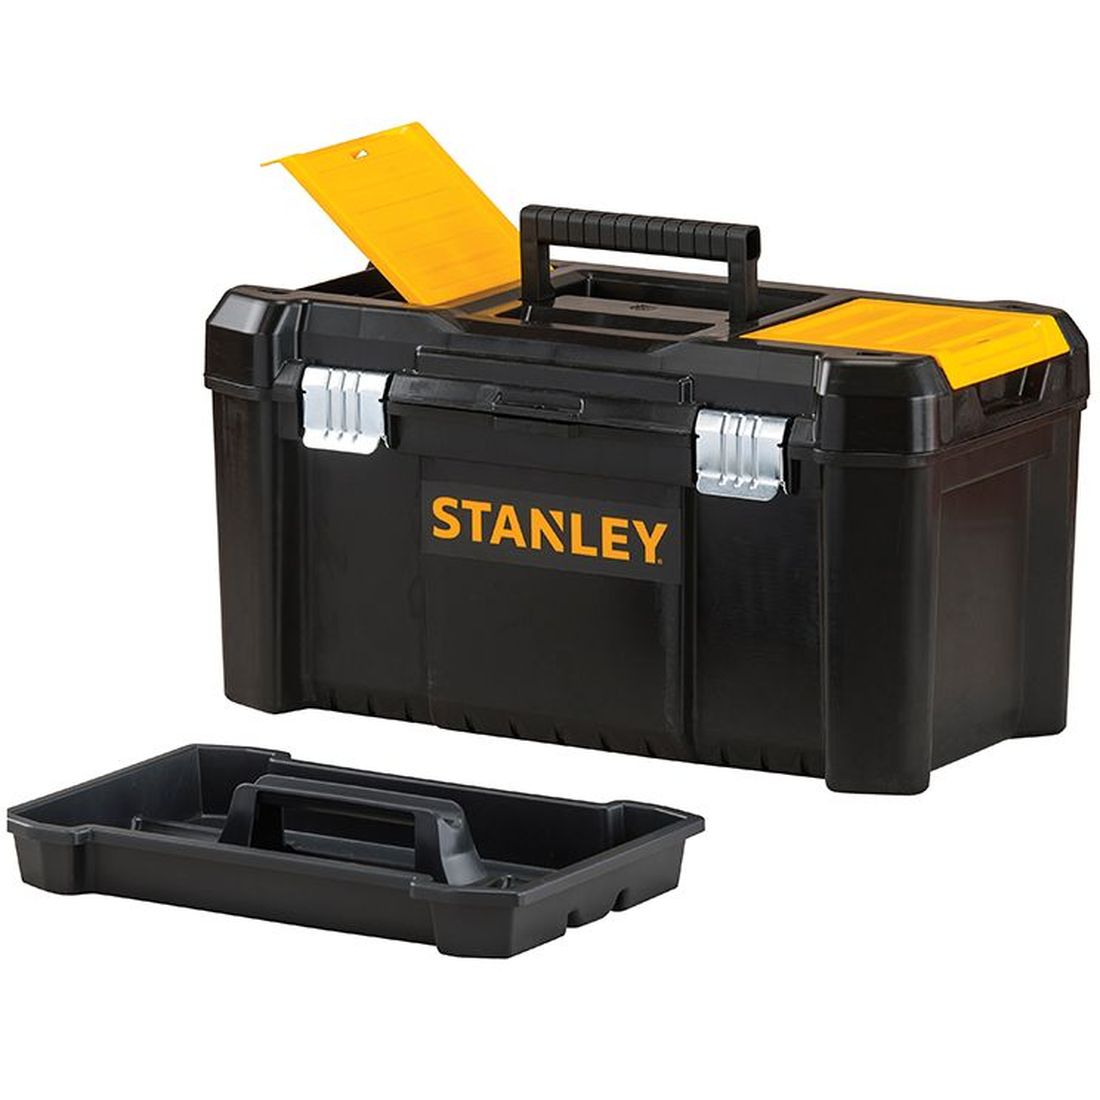 STANLEY Basic Toolbox with Organiser Top 50cm (19in)                                    